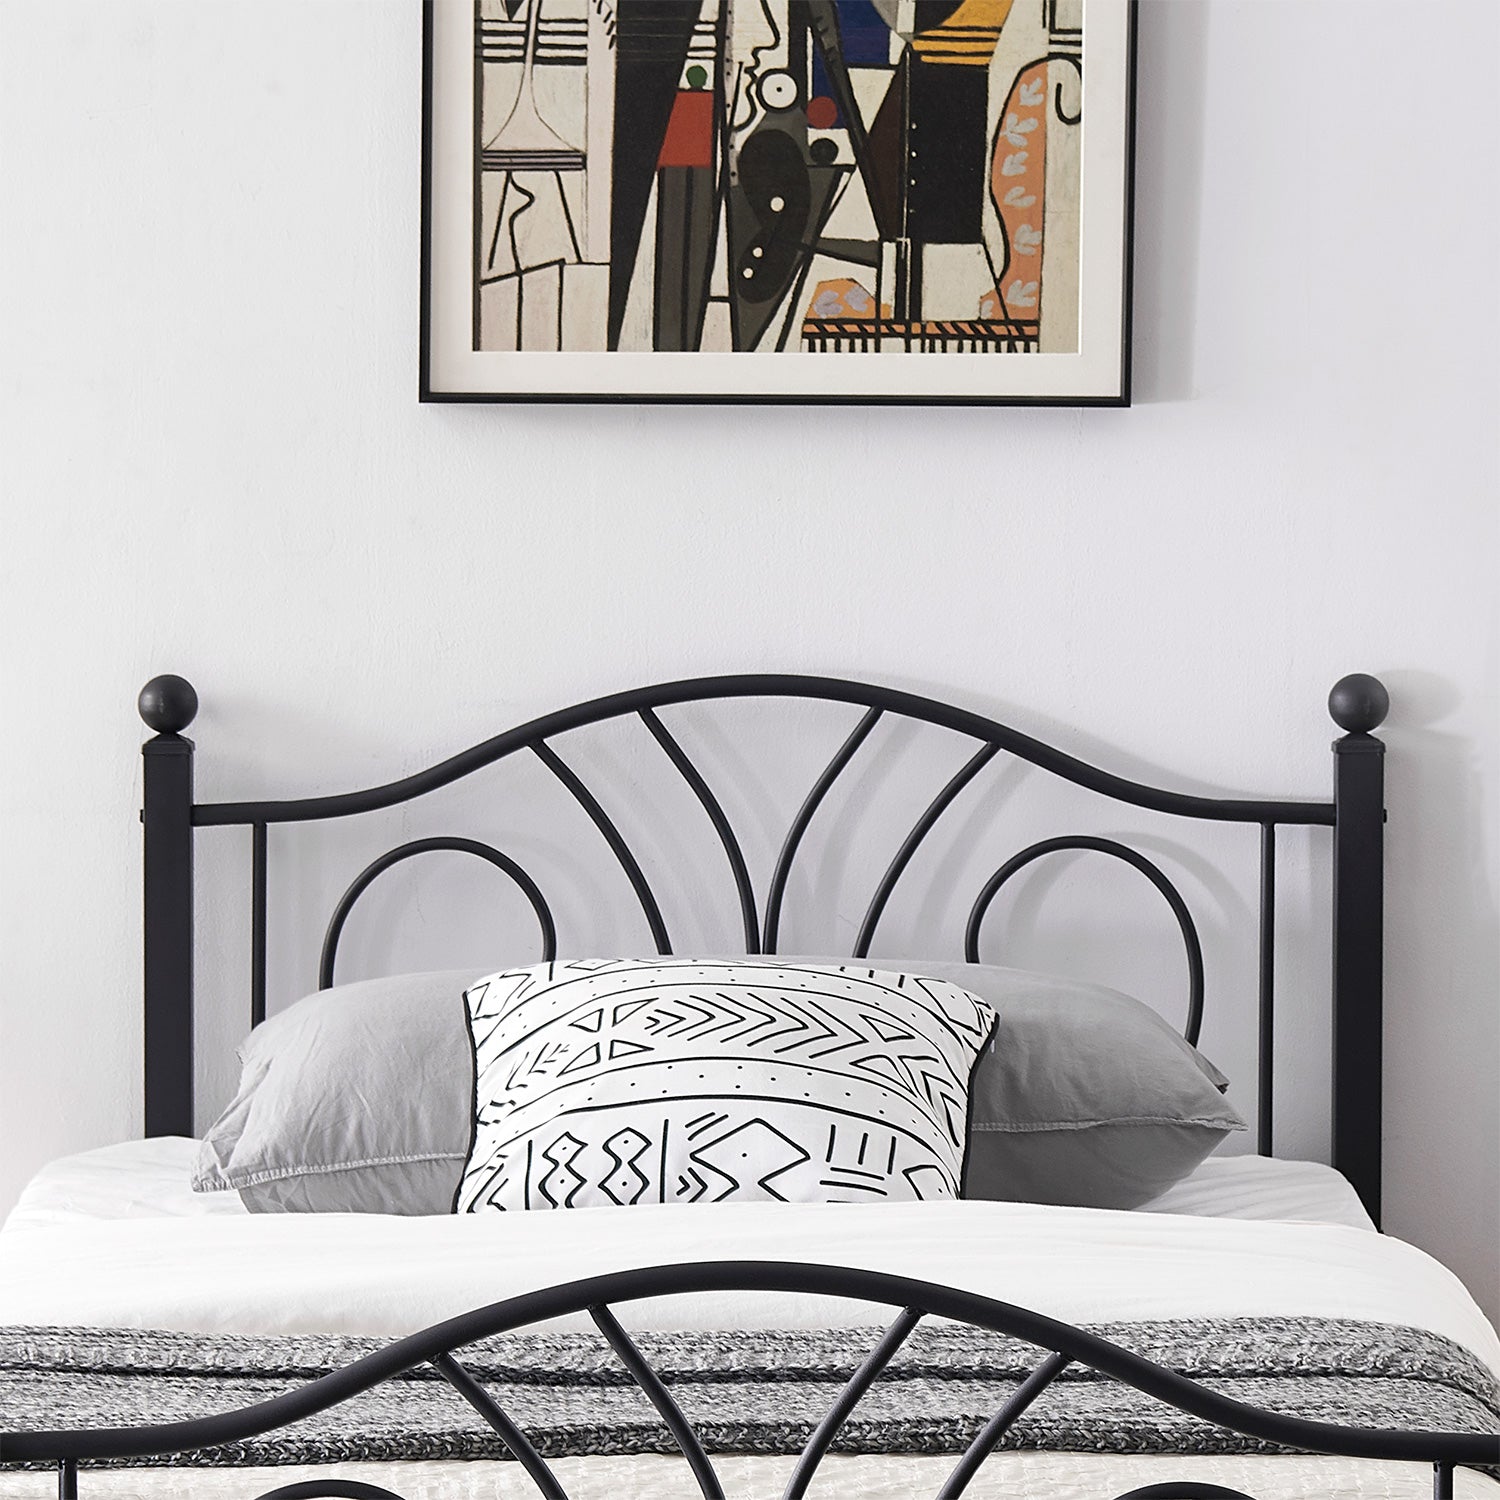 3-Piece Bedroom Sets, Twin Size Metal Bed Frame and 2 Black Nightstands - image 5 of 8